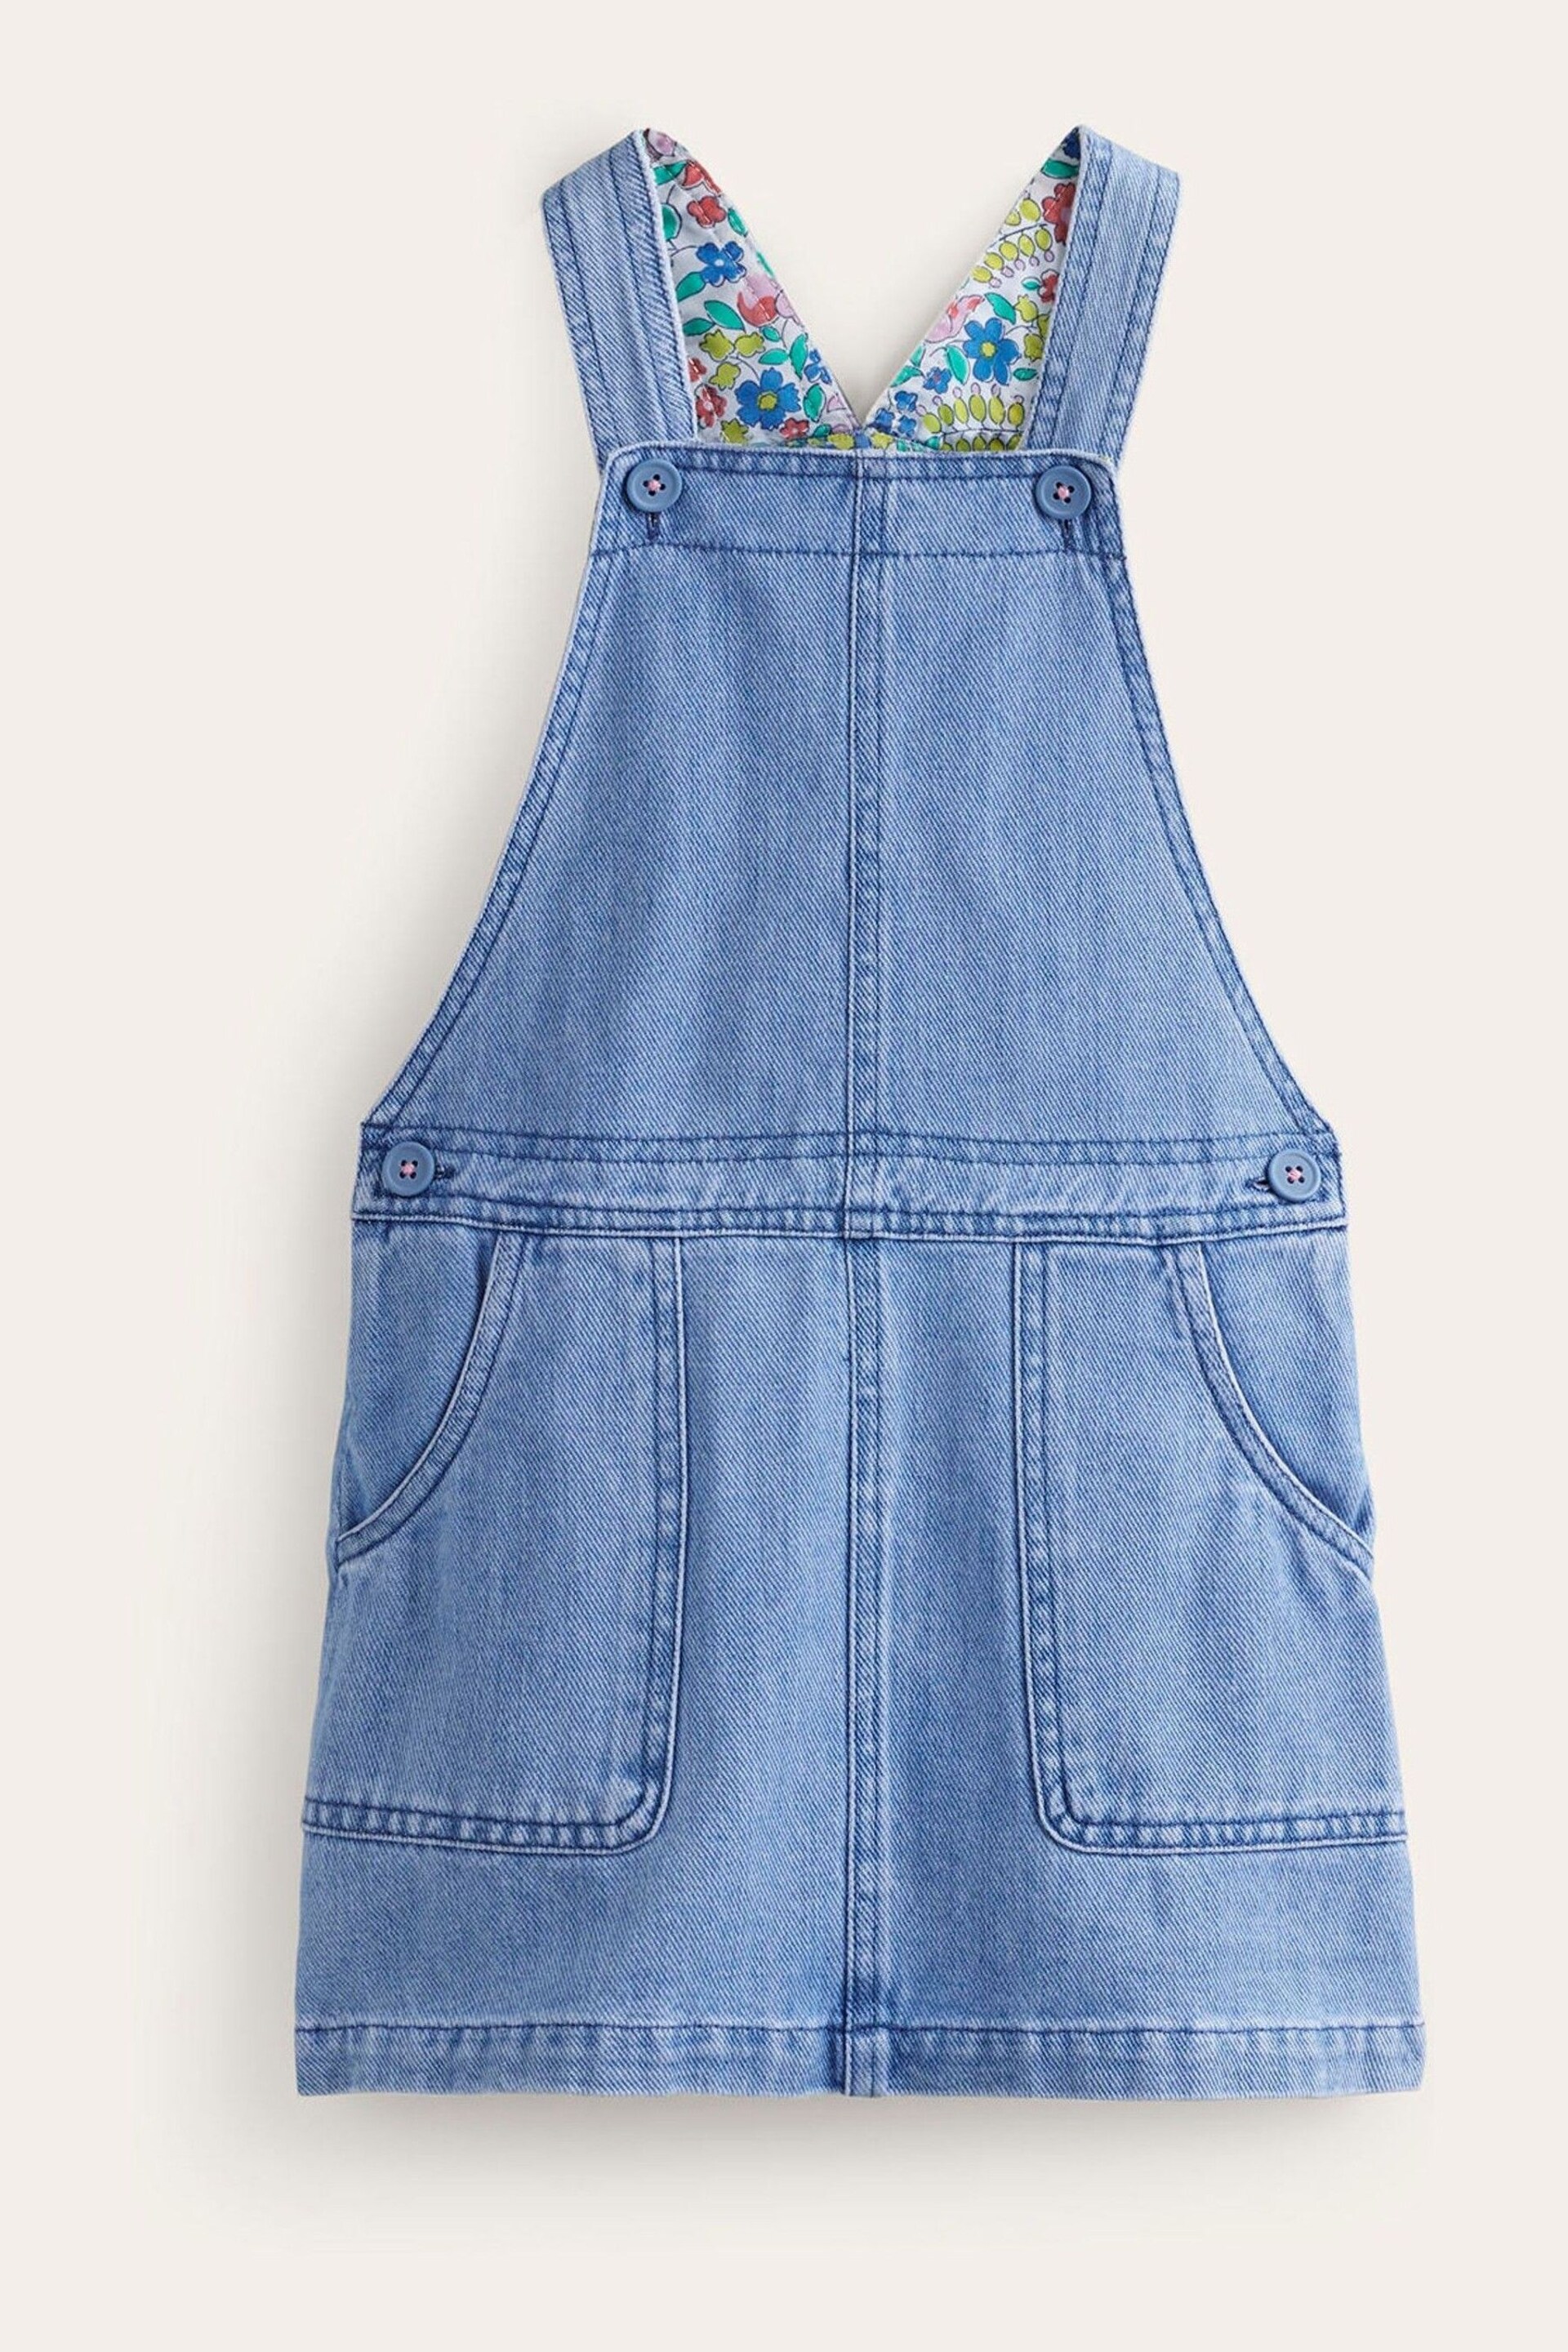 Boden Blue Relaxed Dungaree Dress - Image 2 of 4